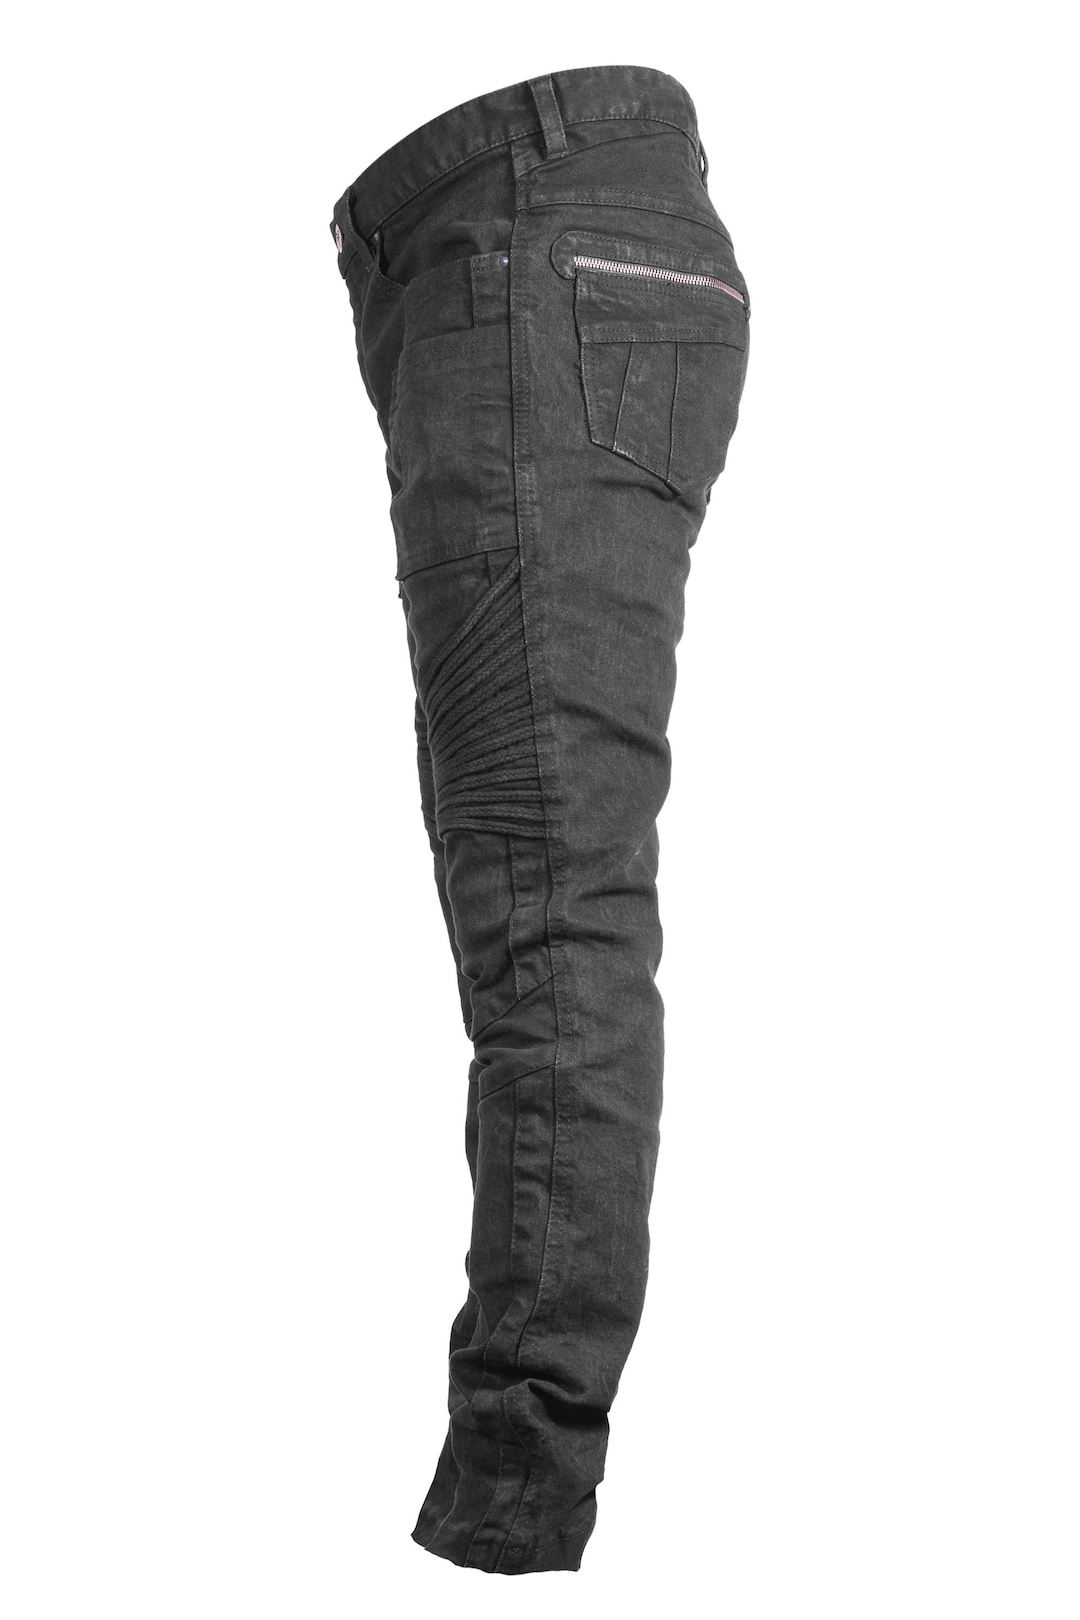 MERGE JEANS Mens Jeans With Ribbed Knees Moto Pant - Etsy